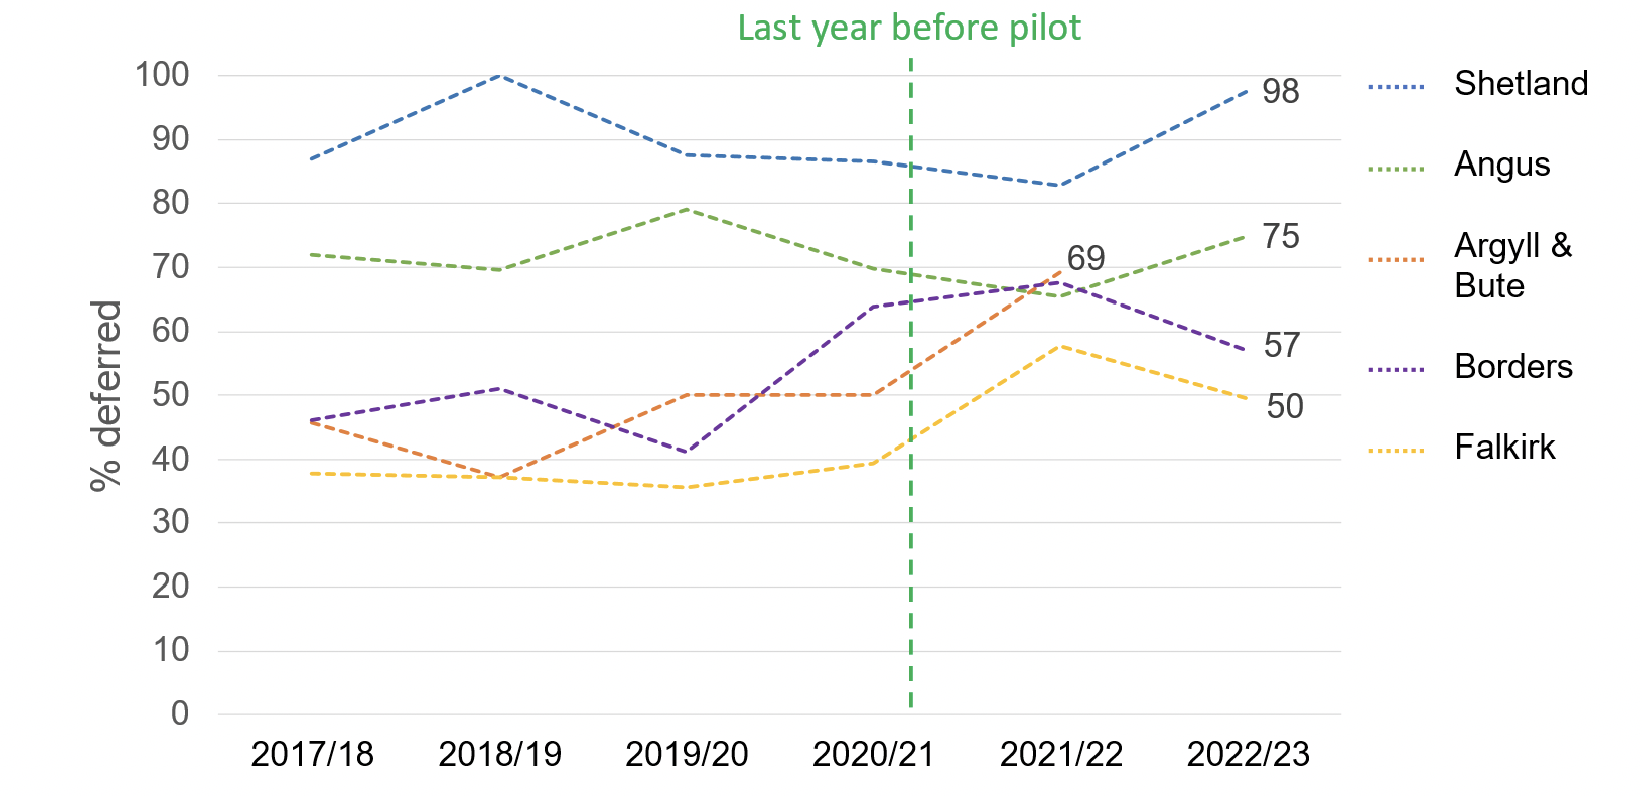 Figure iii is a line chart showing January-February deferral rates for 2017/18 to 2022/23. It compares data from Year 1 pilot areas which are Shetland, Angus, Argyll & Bute, Borders, and Falkirk. There are no clear trends shown in regard to the impact of the pilot. Shetland and Angus saw a small decrease in the year following the pilot, but saw an increase in deferral rates in the second year of the pilot. The Borders and Falkirk did see an increase after the pilot, but saw a decrease in the following year.